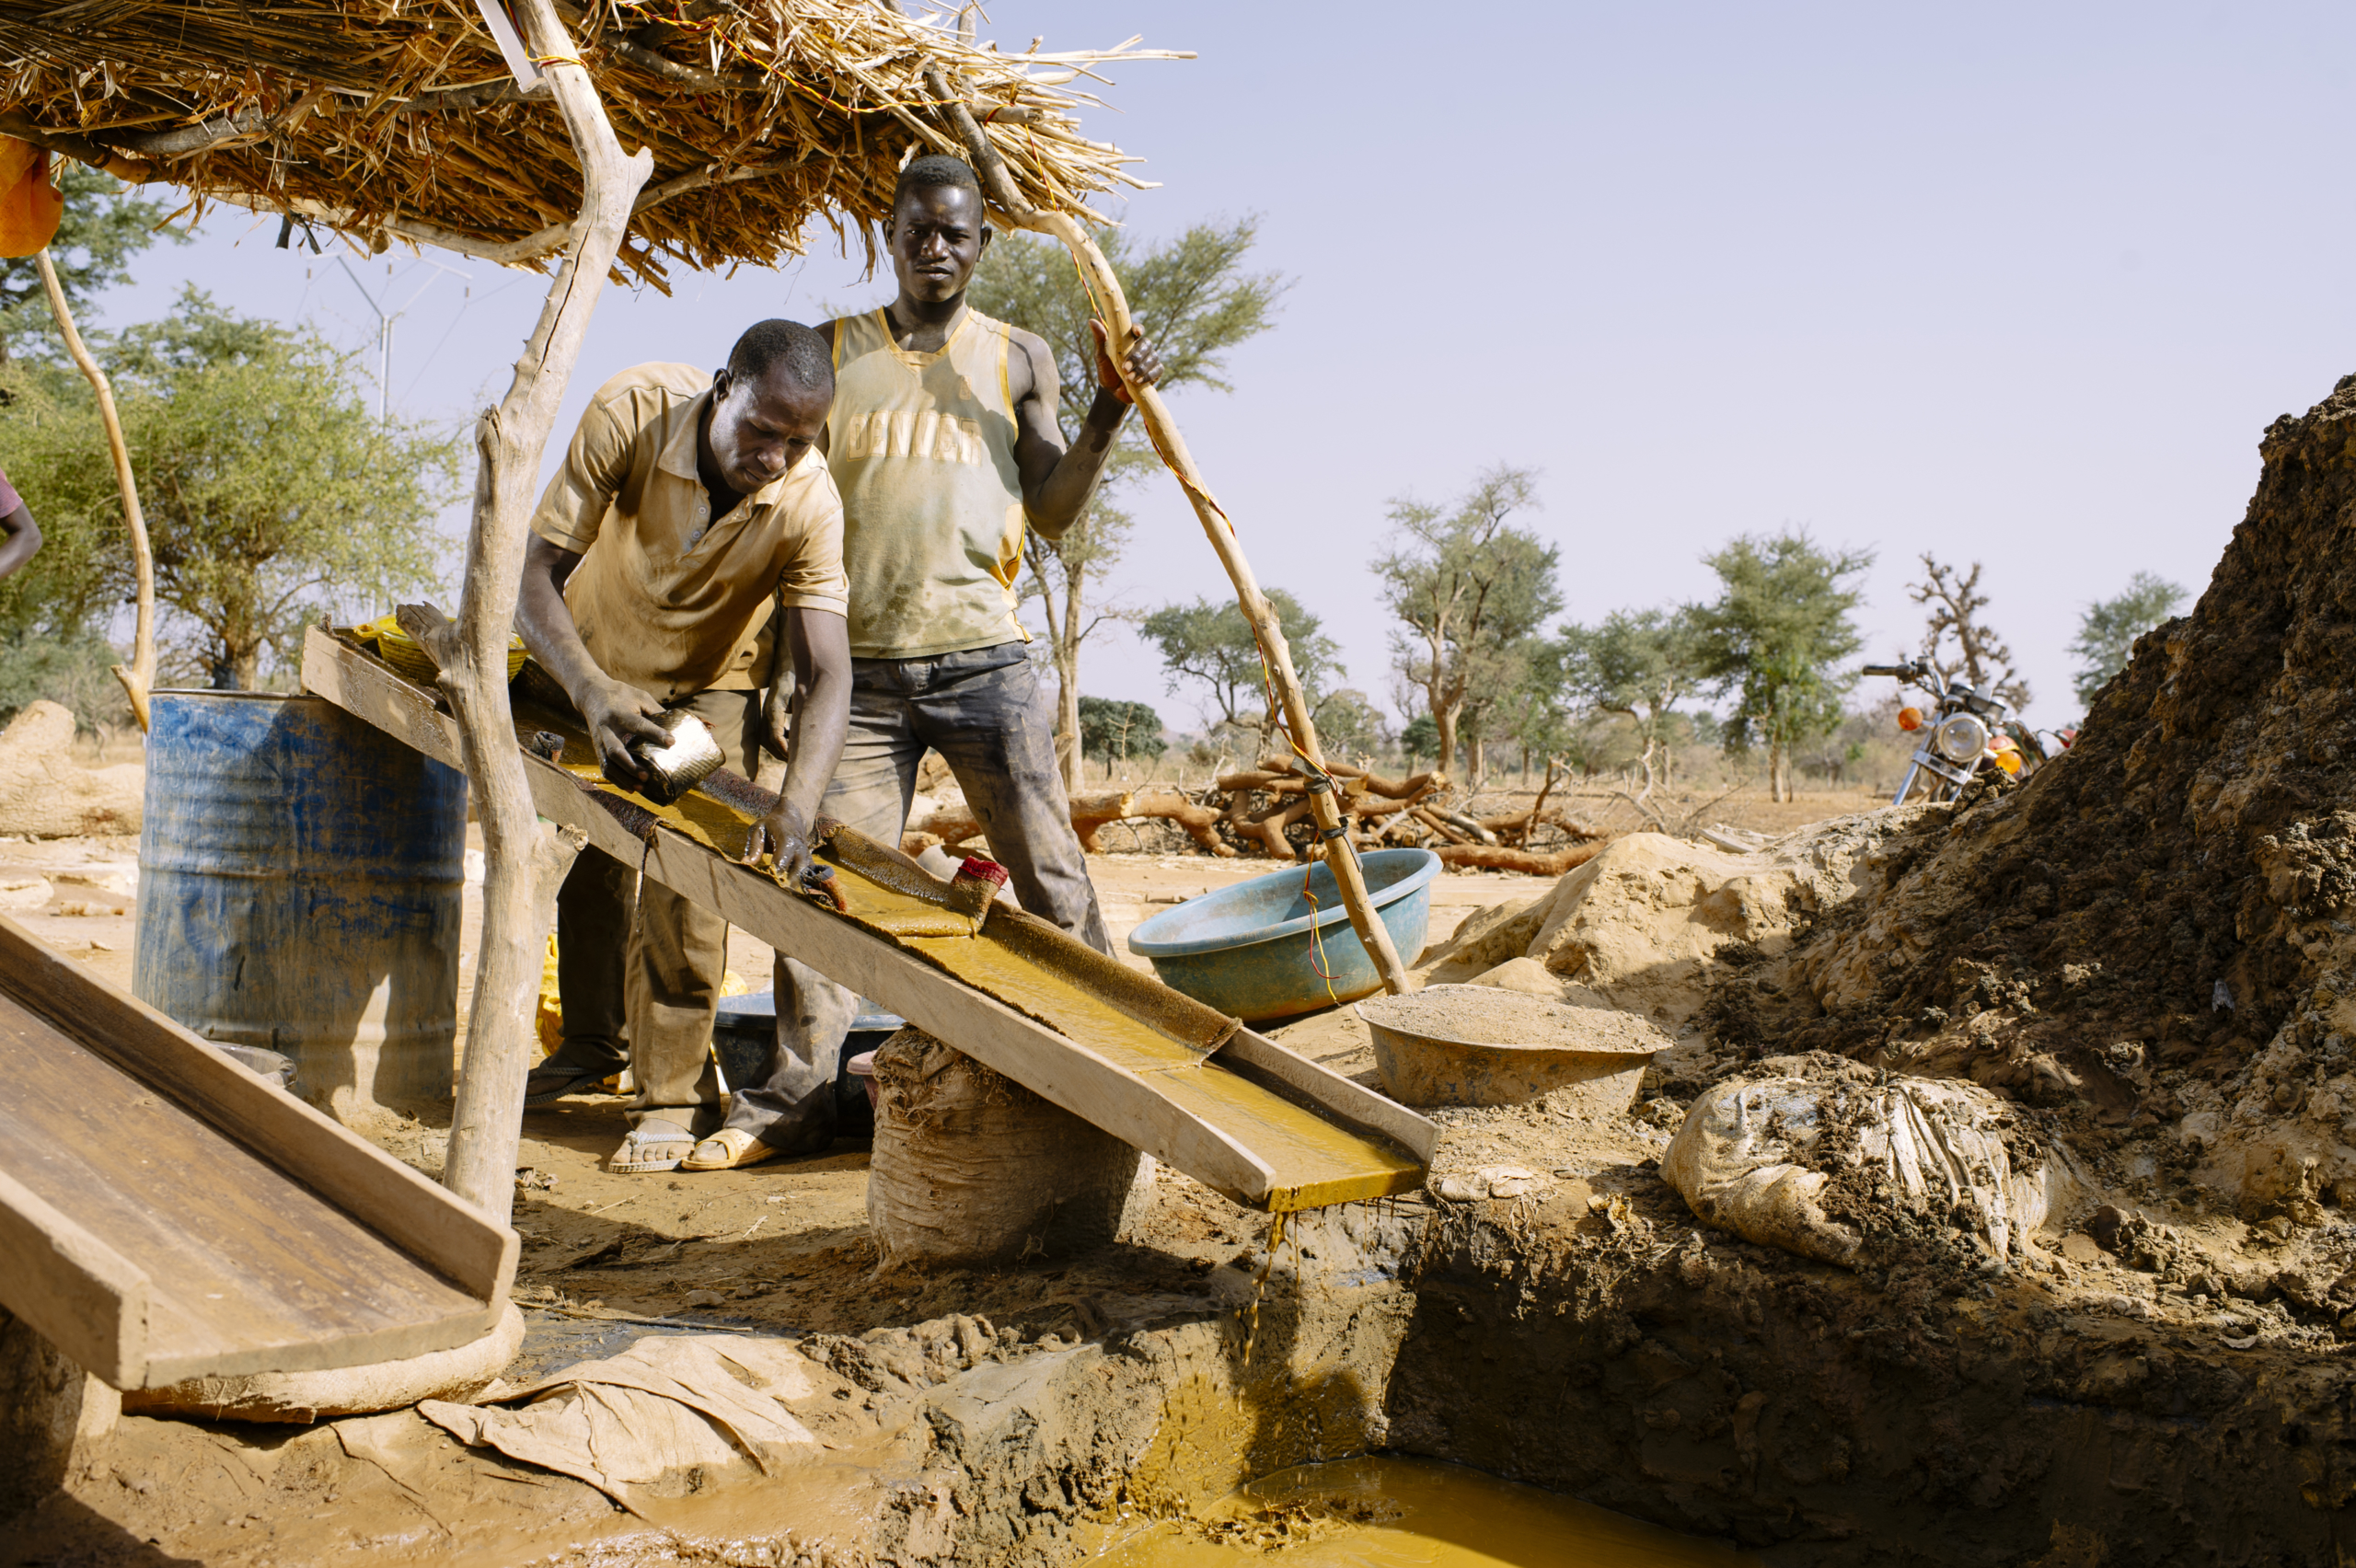 How COVID-19 Has Impacted Artisanal Gold Miners in Burkina Faso